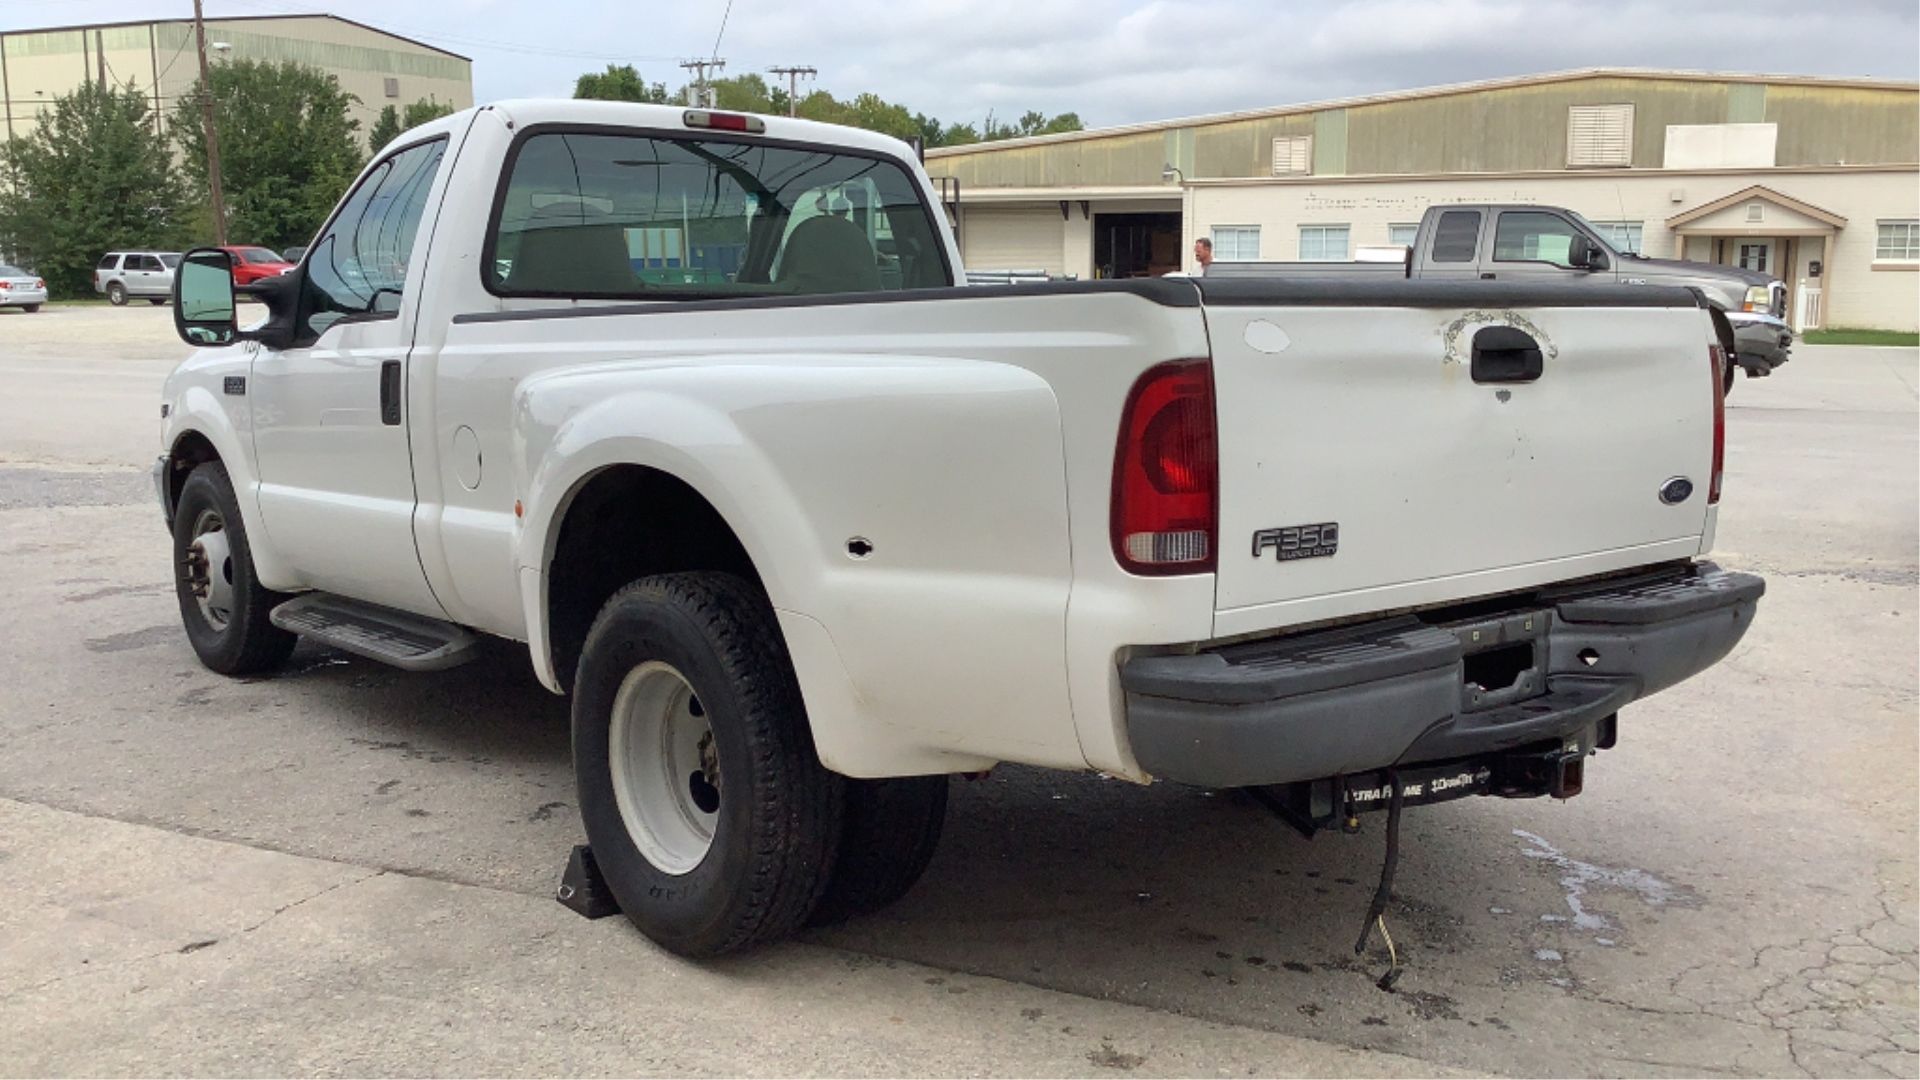 2002 Ford F-350 Regular Cab Dually 2WD - Image 16 of 89